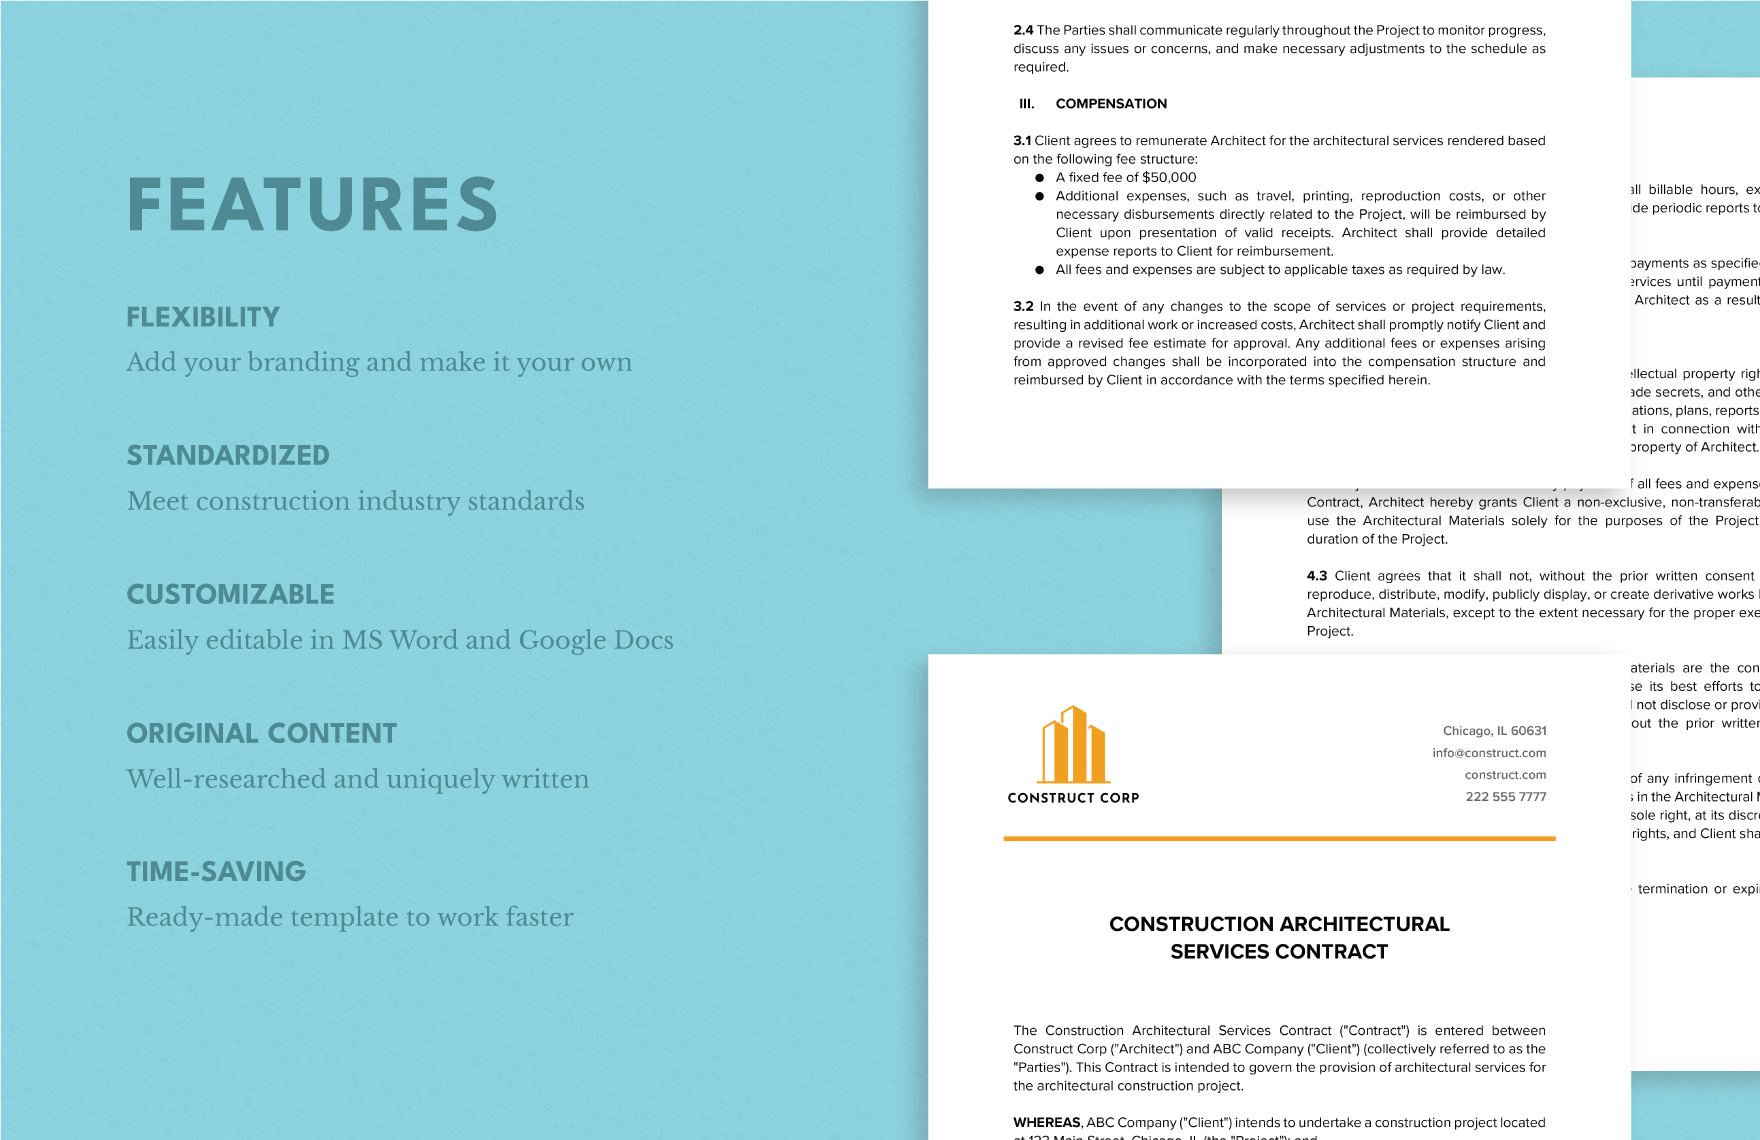 Construction Architectural Services Contract Template